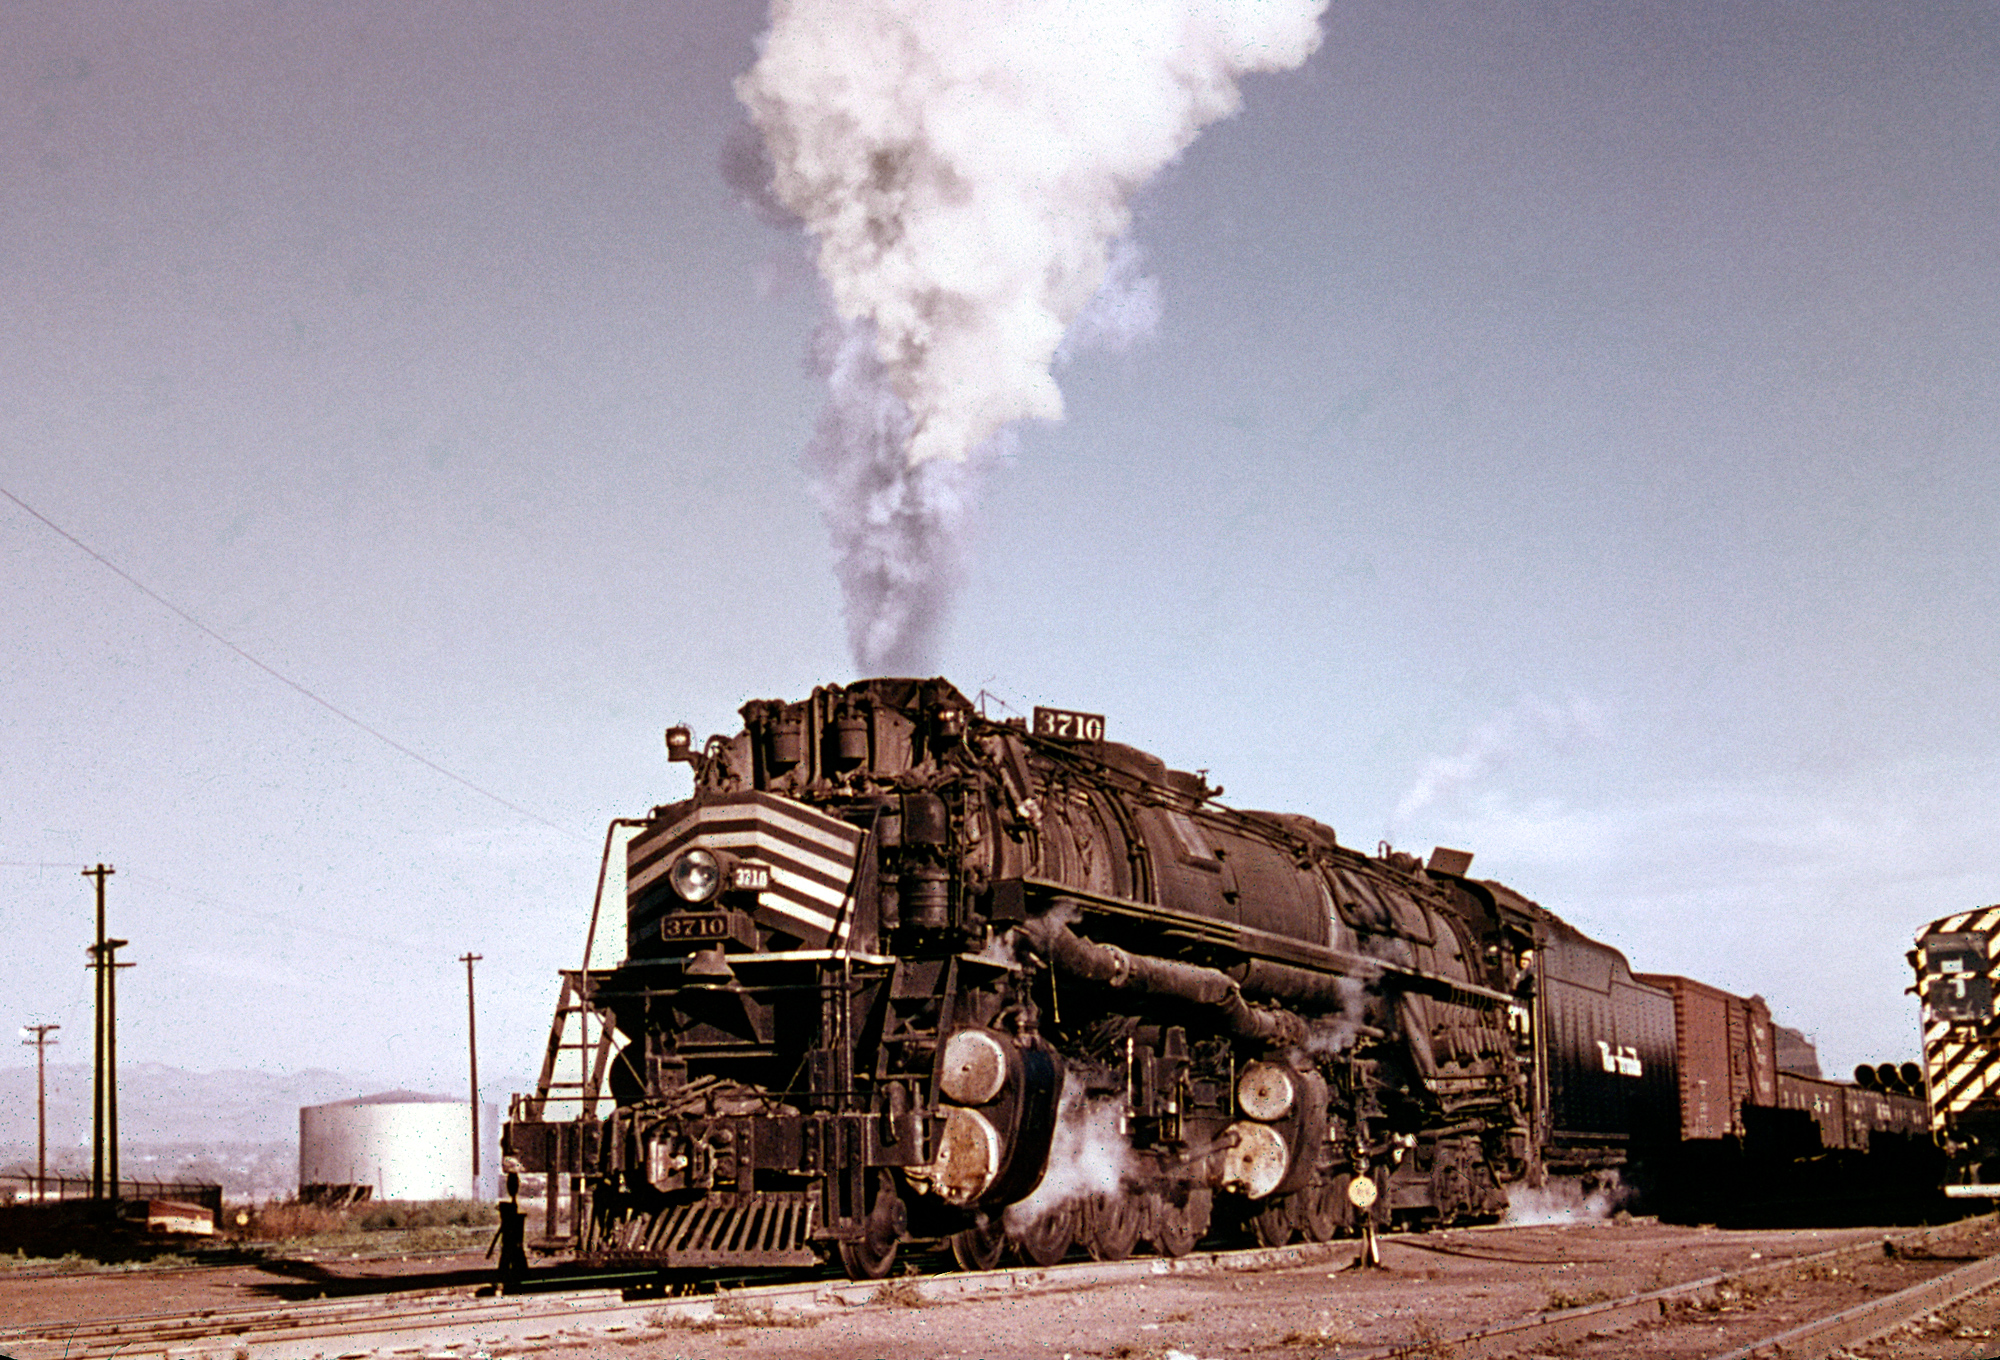 early american steam locomotives